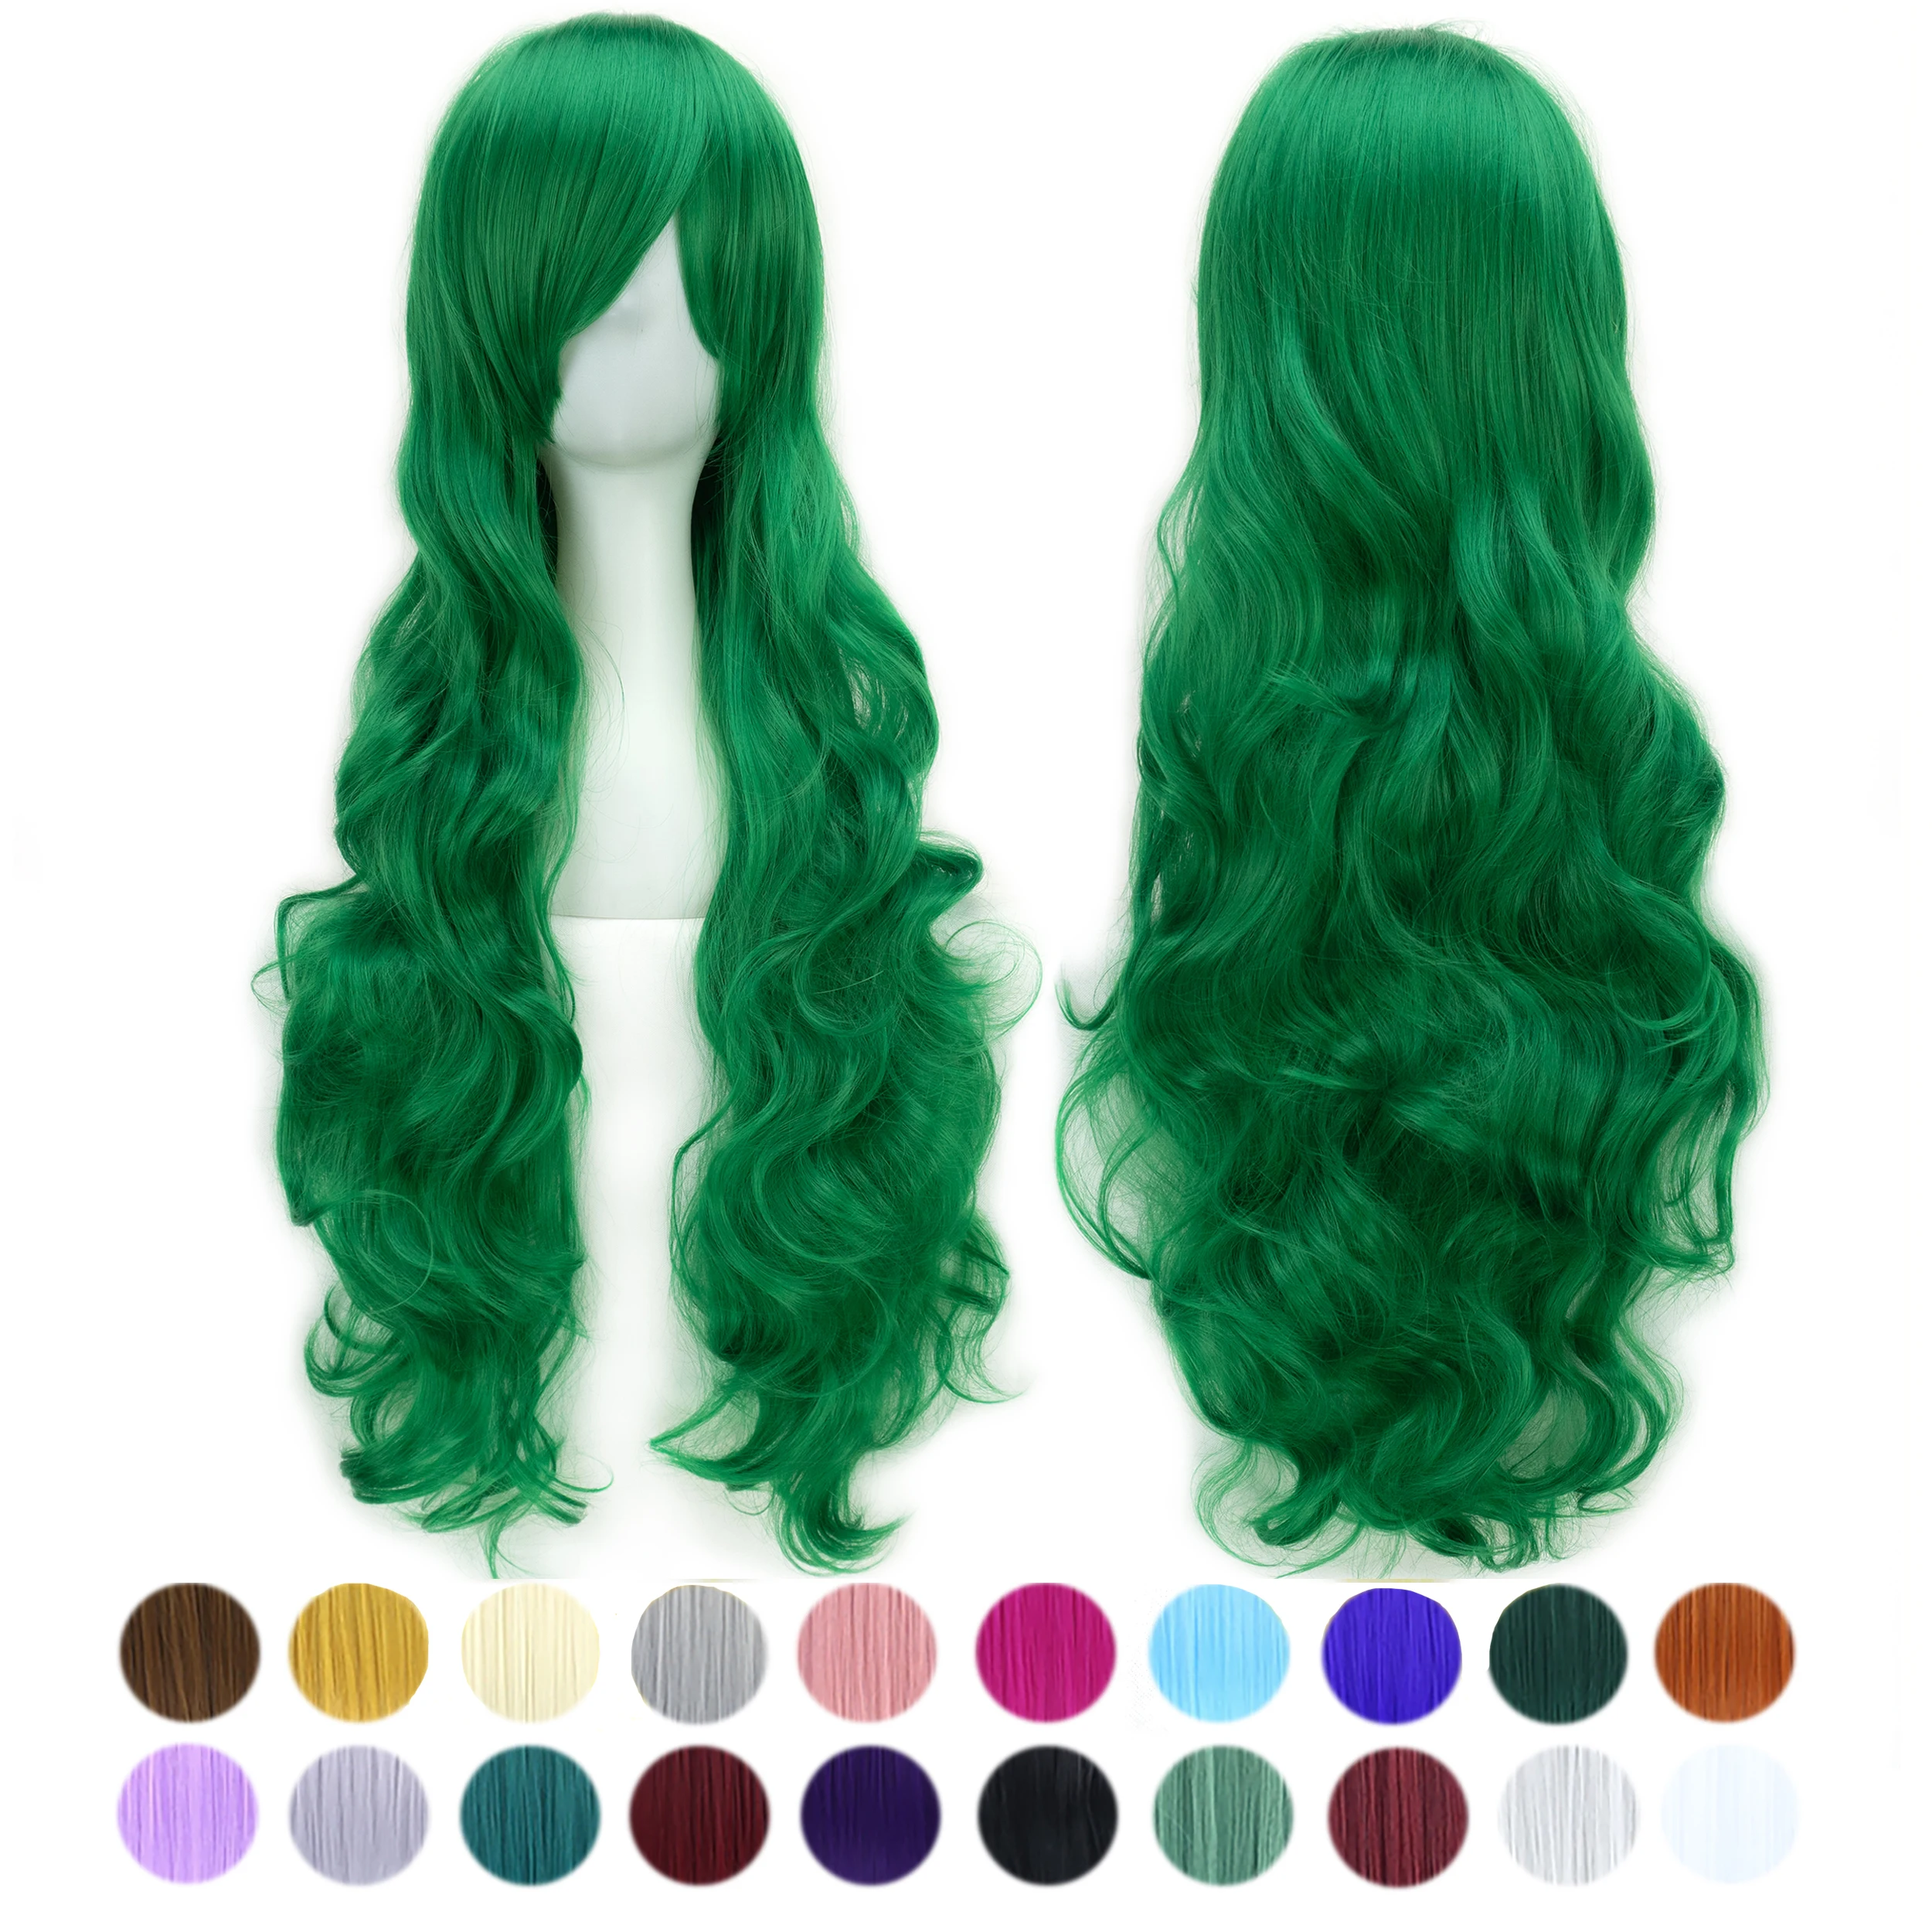 Soowee 30 Colors 80cm Long Curly Hair Wig Heat Resistant Synthetic Hair Pink Green Hairpiece Party Cosplay Wigs for Women